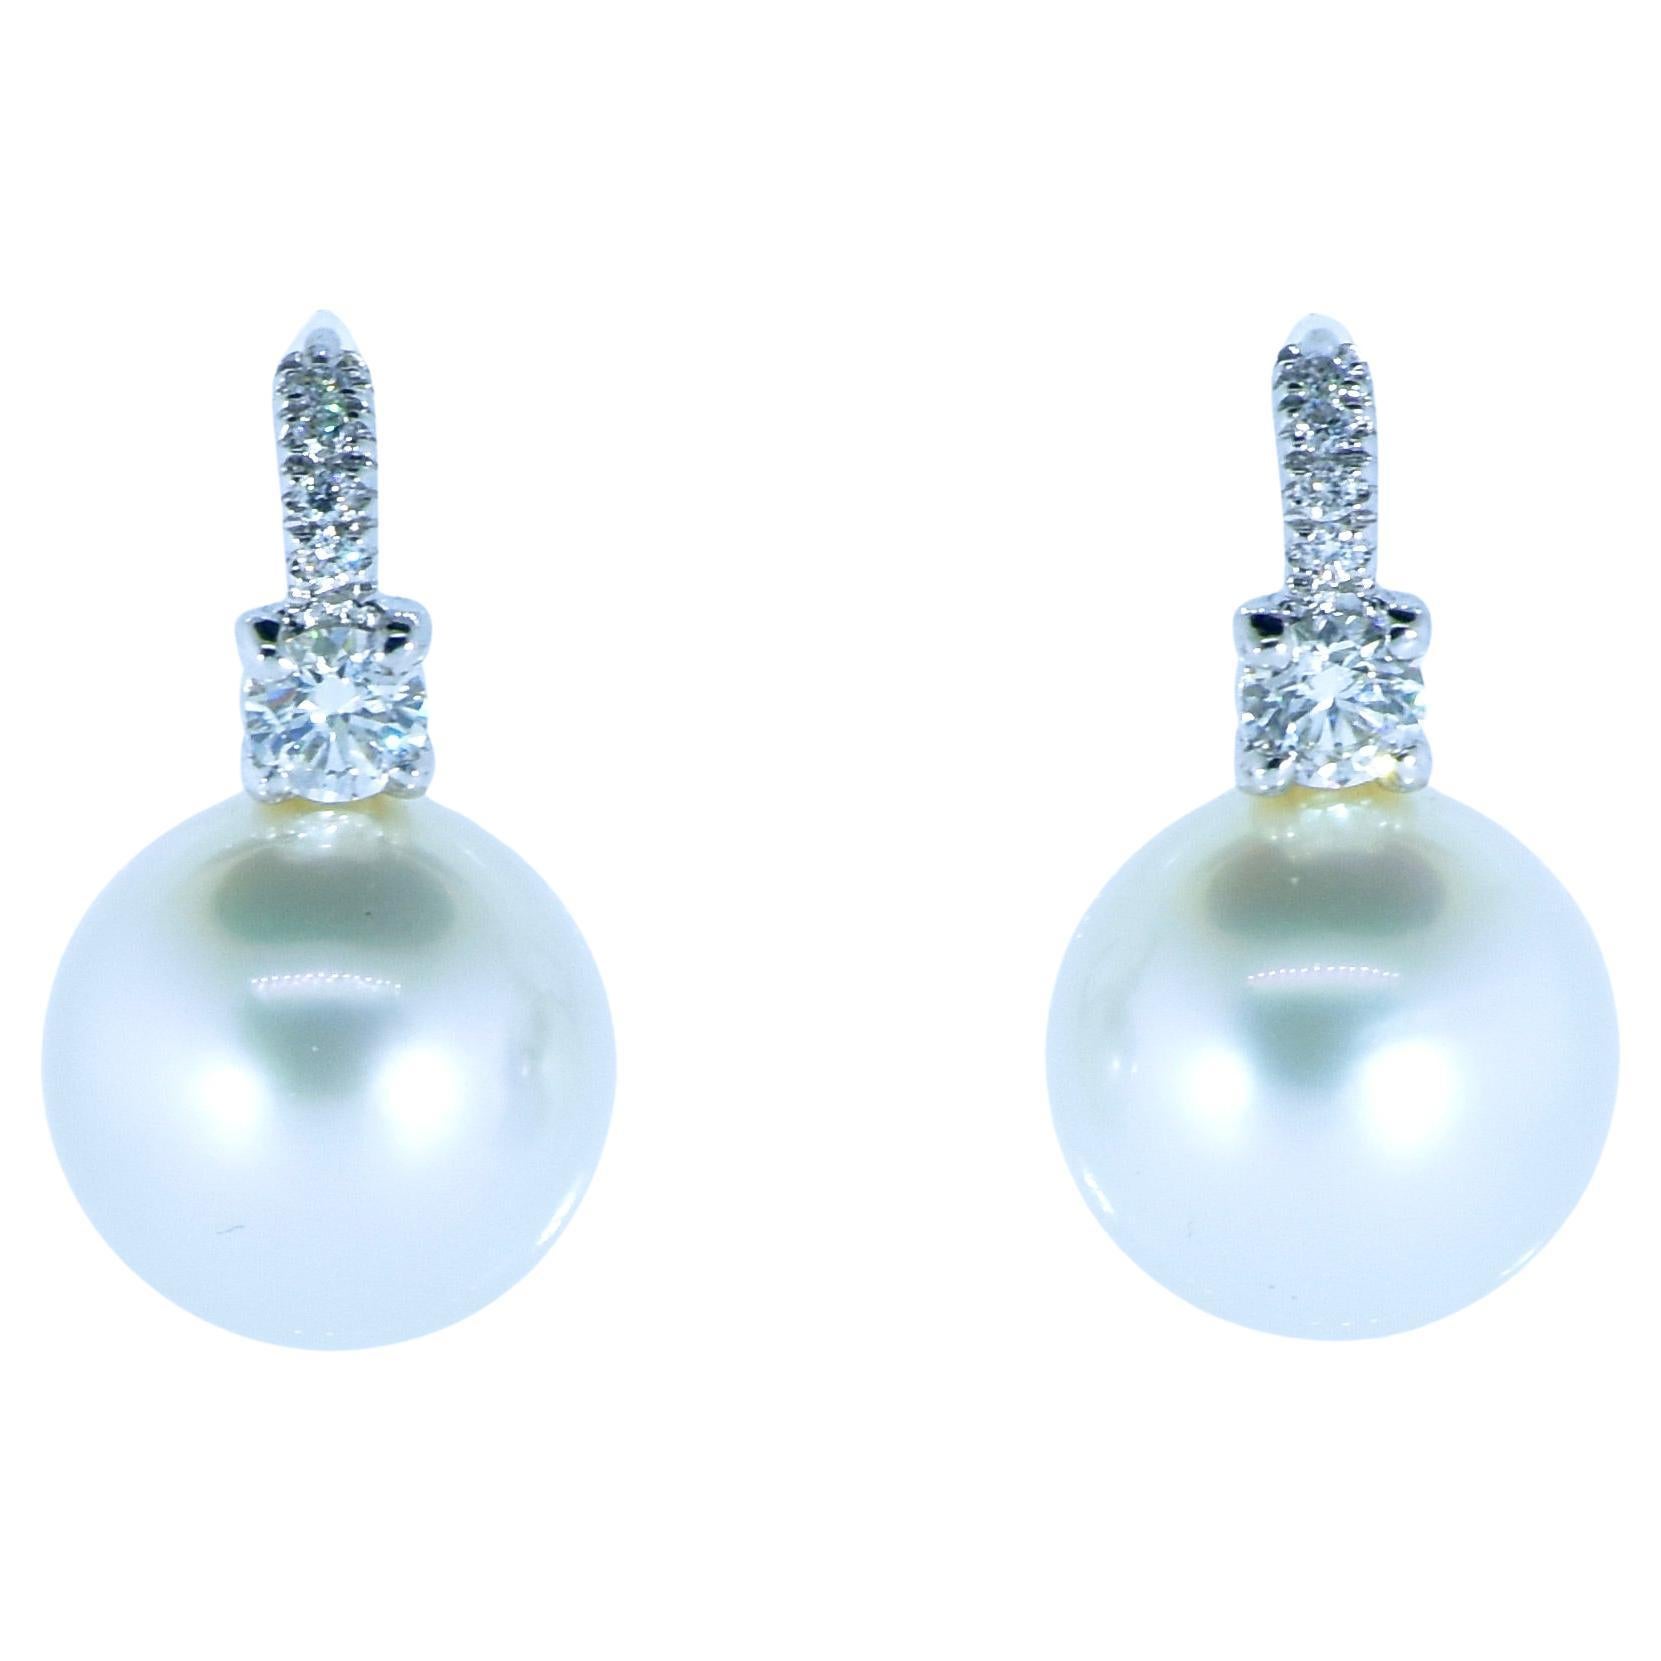 South Sea Pearl, over 12 mm & Diamond 18k White Gold Fine Contemporary Earrings